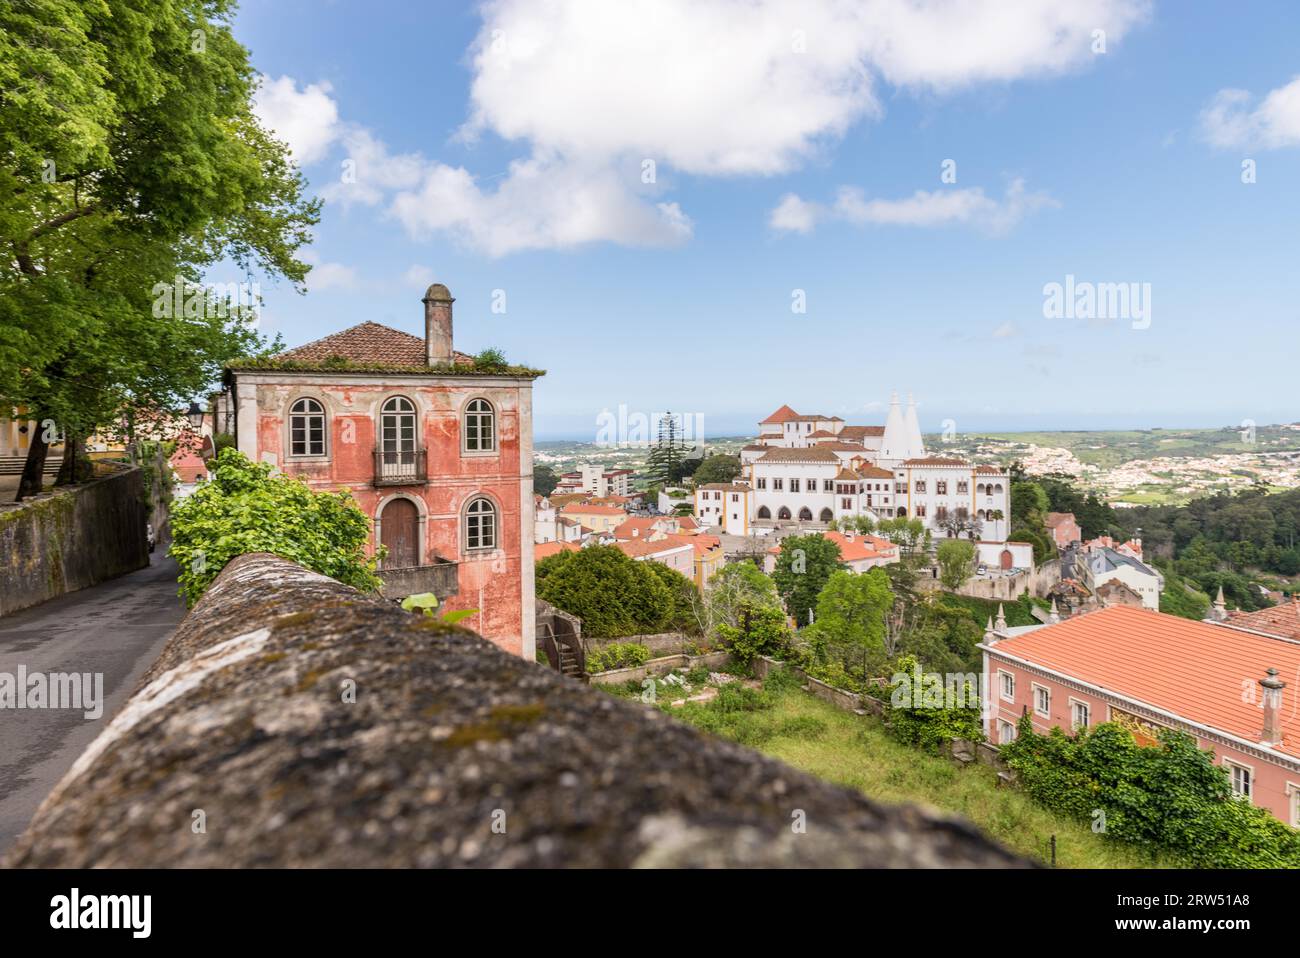 Sintra, Portugal, April 23: Old Buildings and houses in Sintra, Portugal, April 23, 2014 Stock Photo